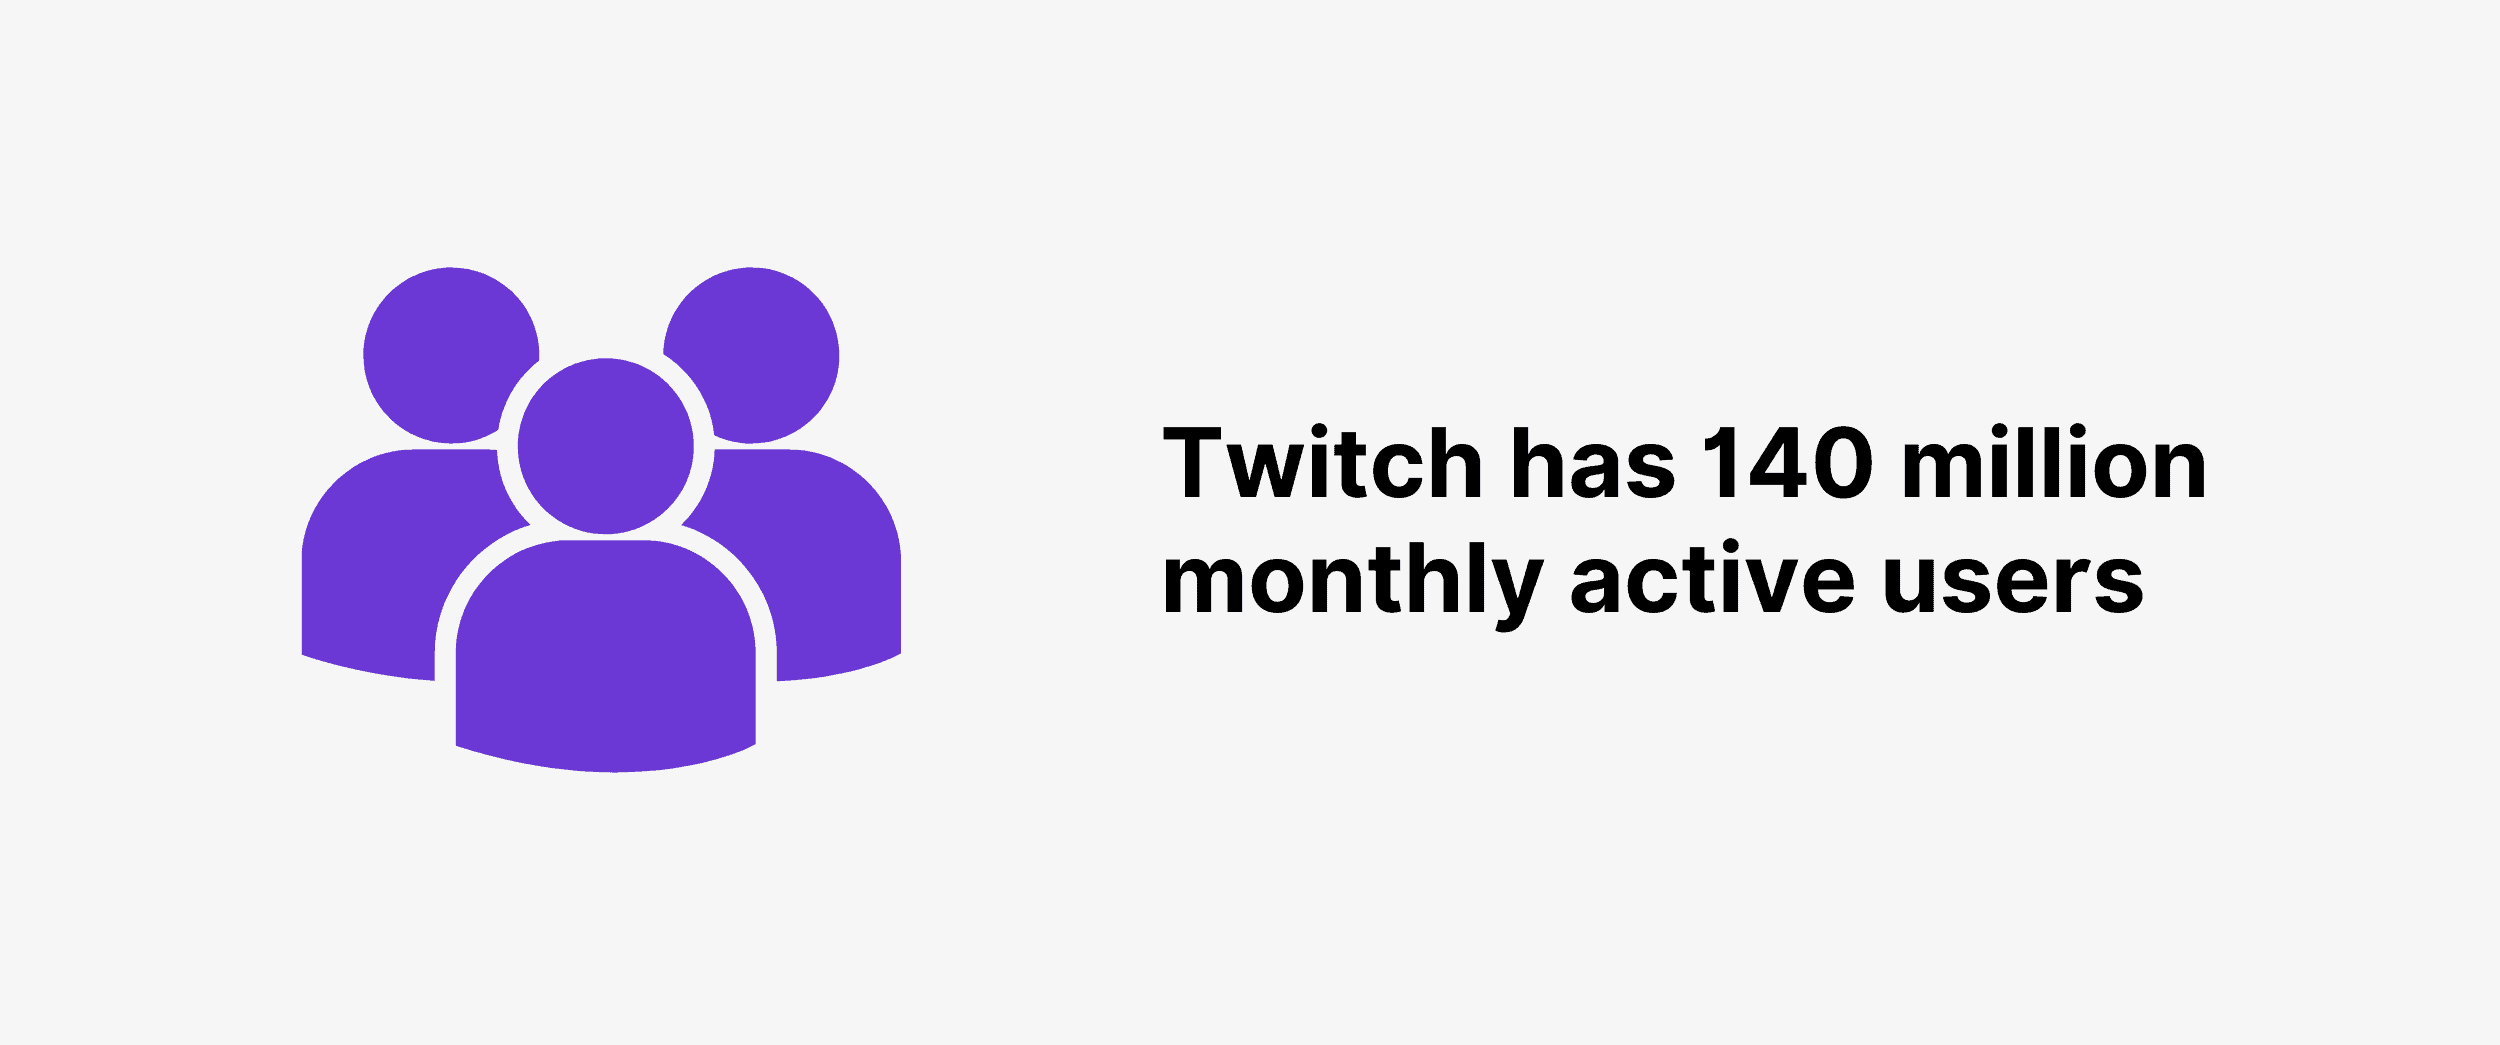 Twitch has 140 million monthly active users